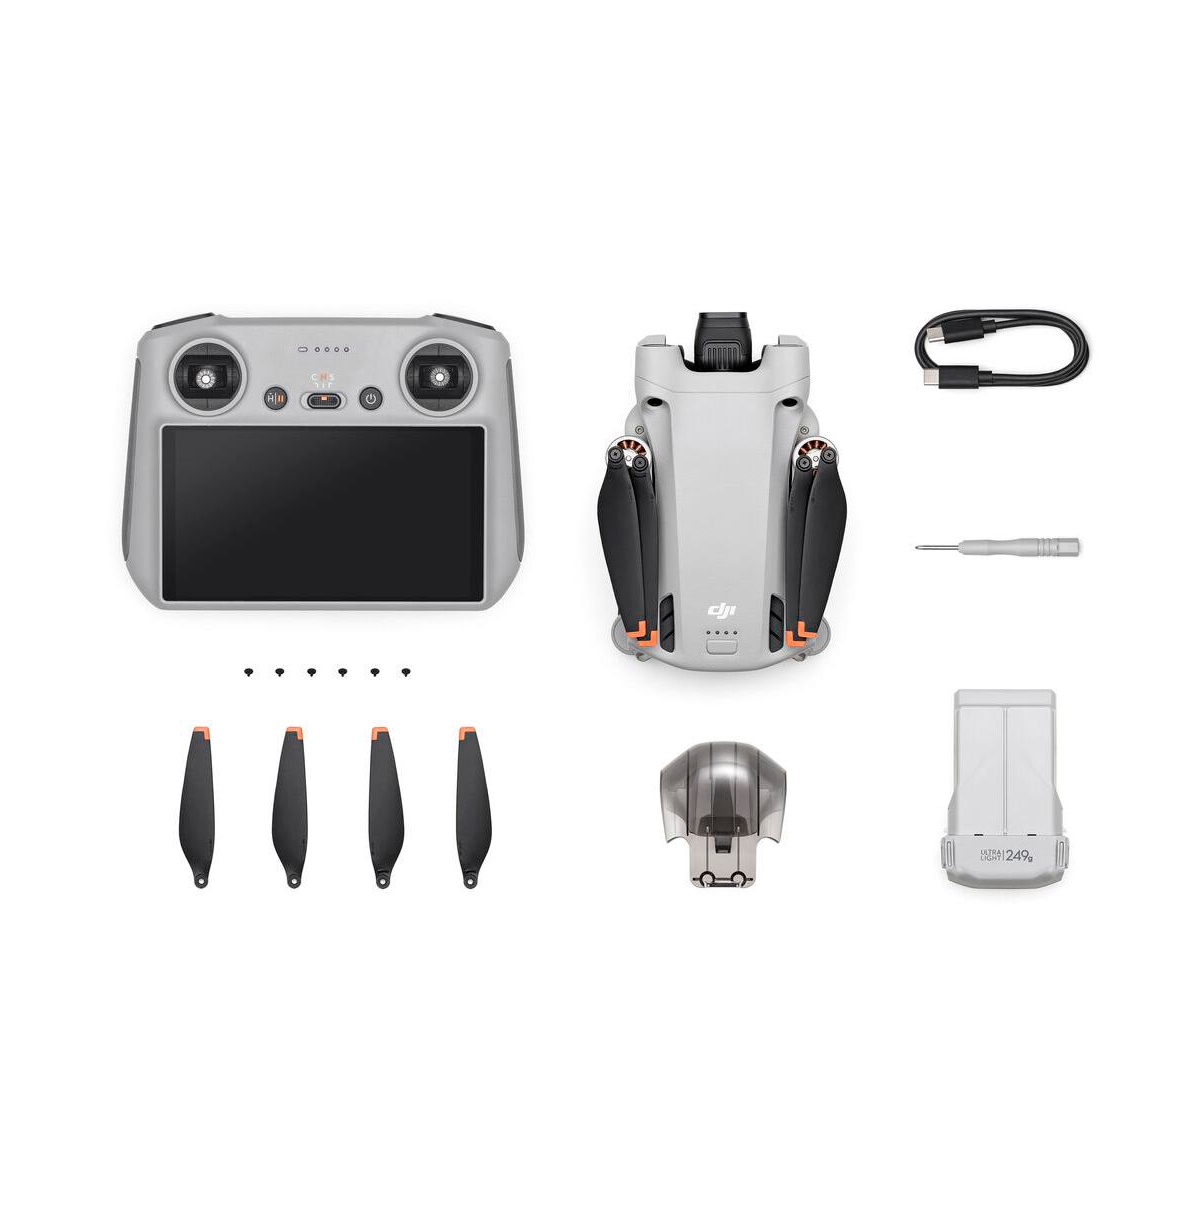 DJI - Mini 3 Pro and Remote Control with Built-in Screen - Gray